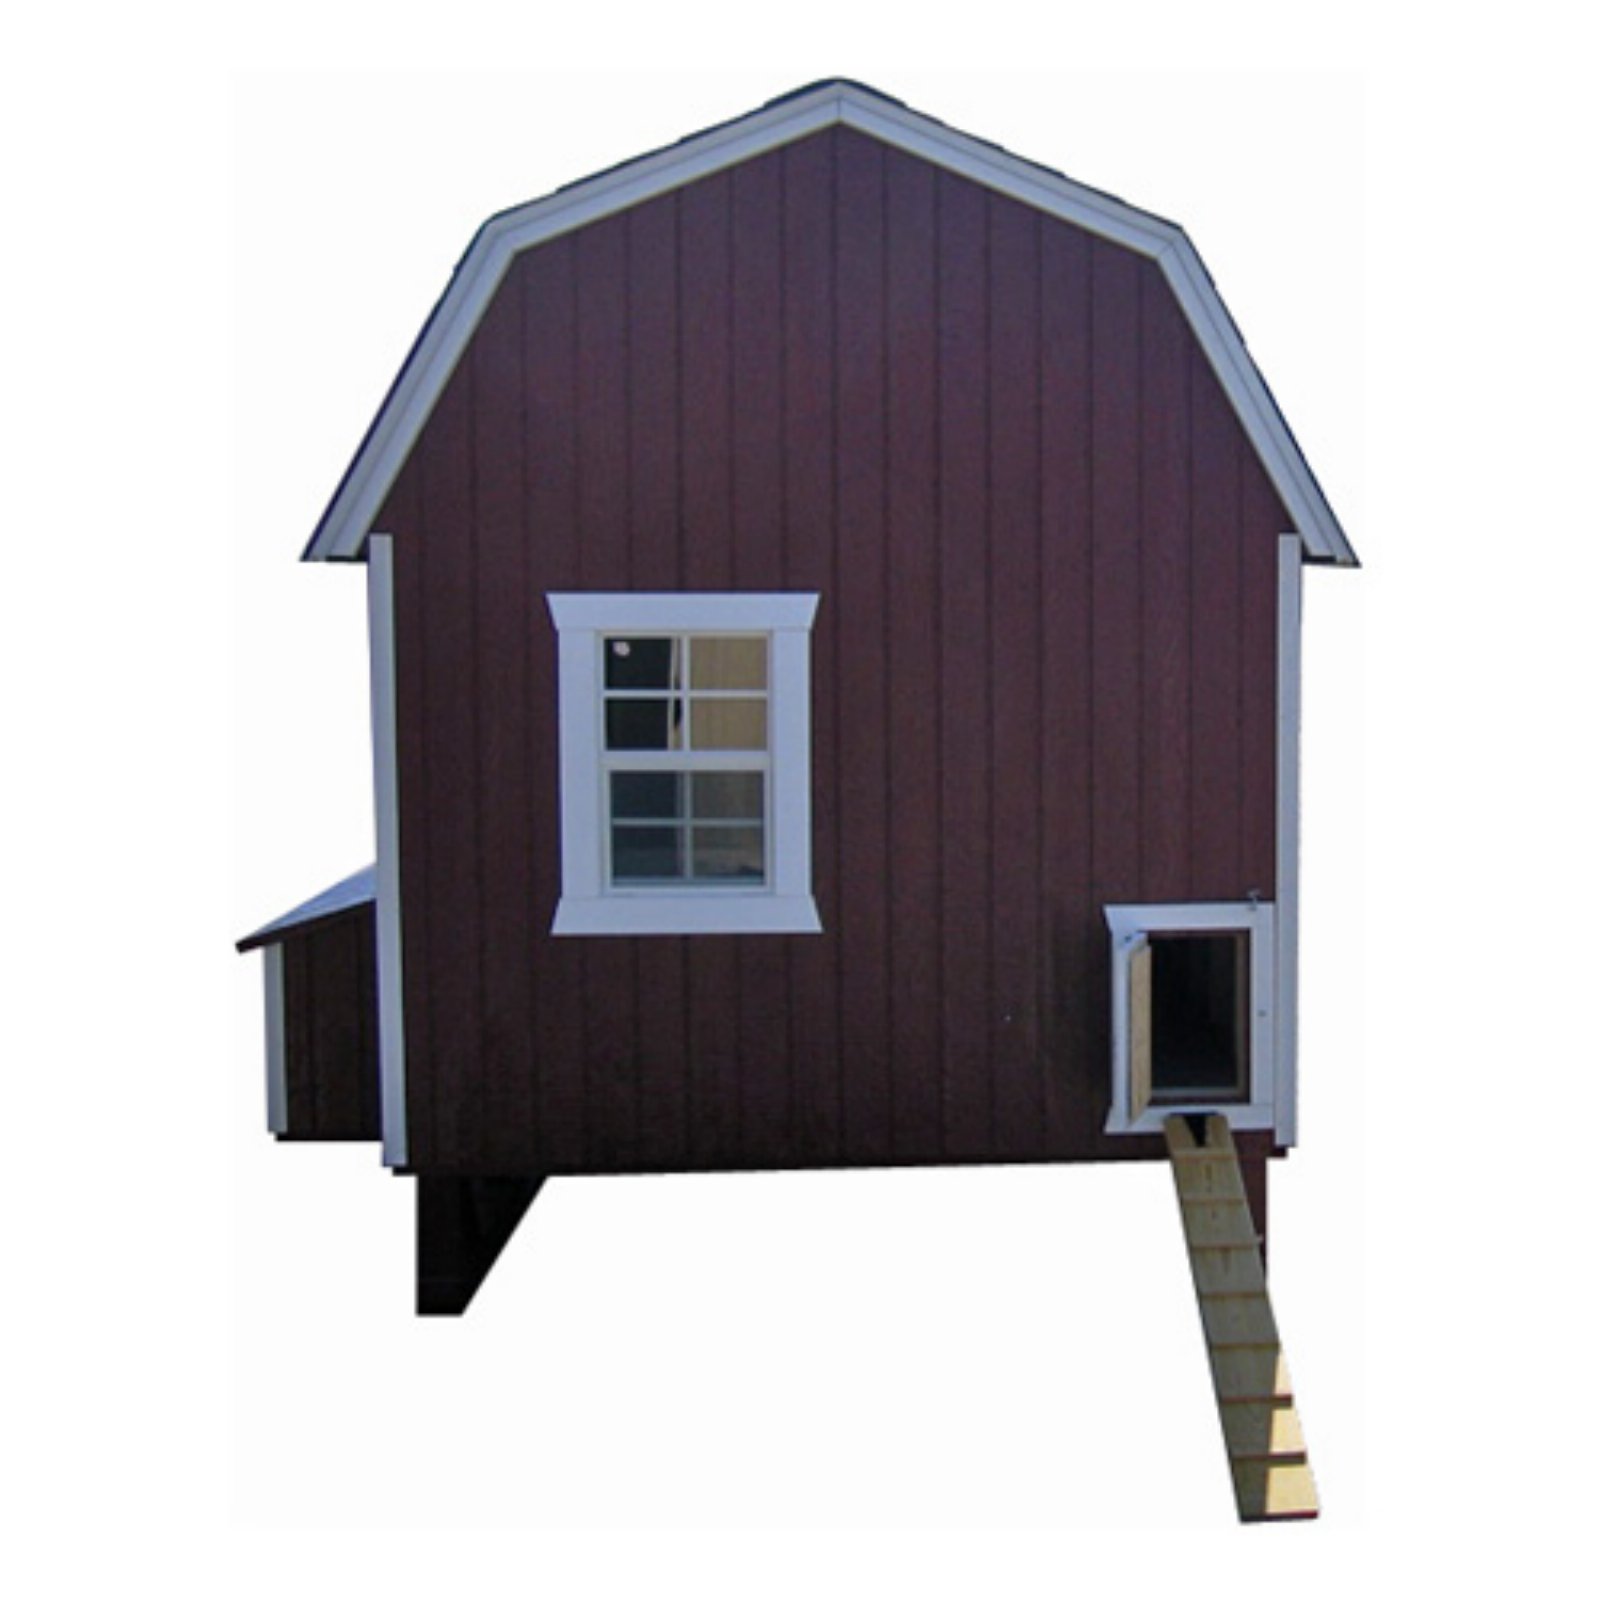 Little Cottage Unpainted Gambrel Barn Chicken Coop - Large 6 x 8 ft. - image 3 of 3